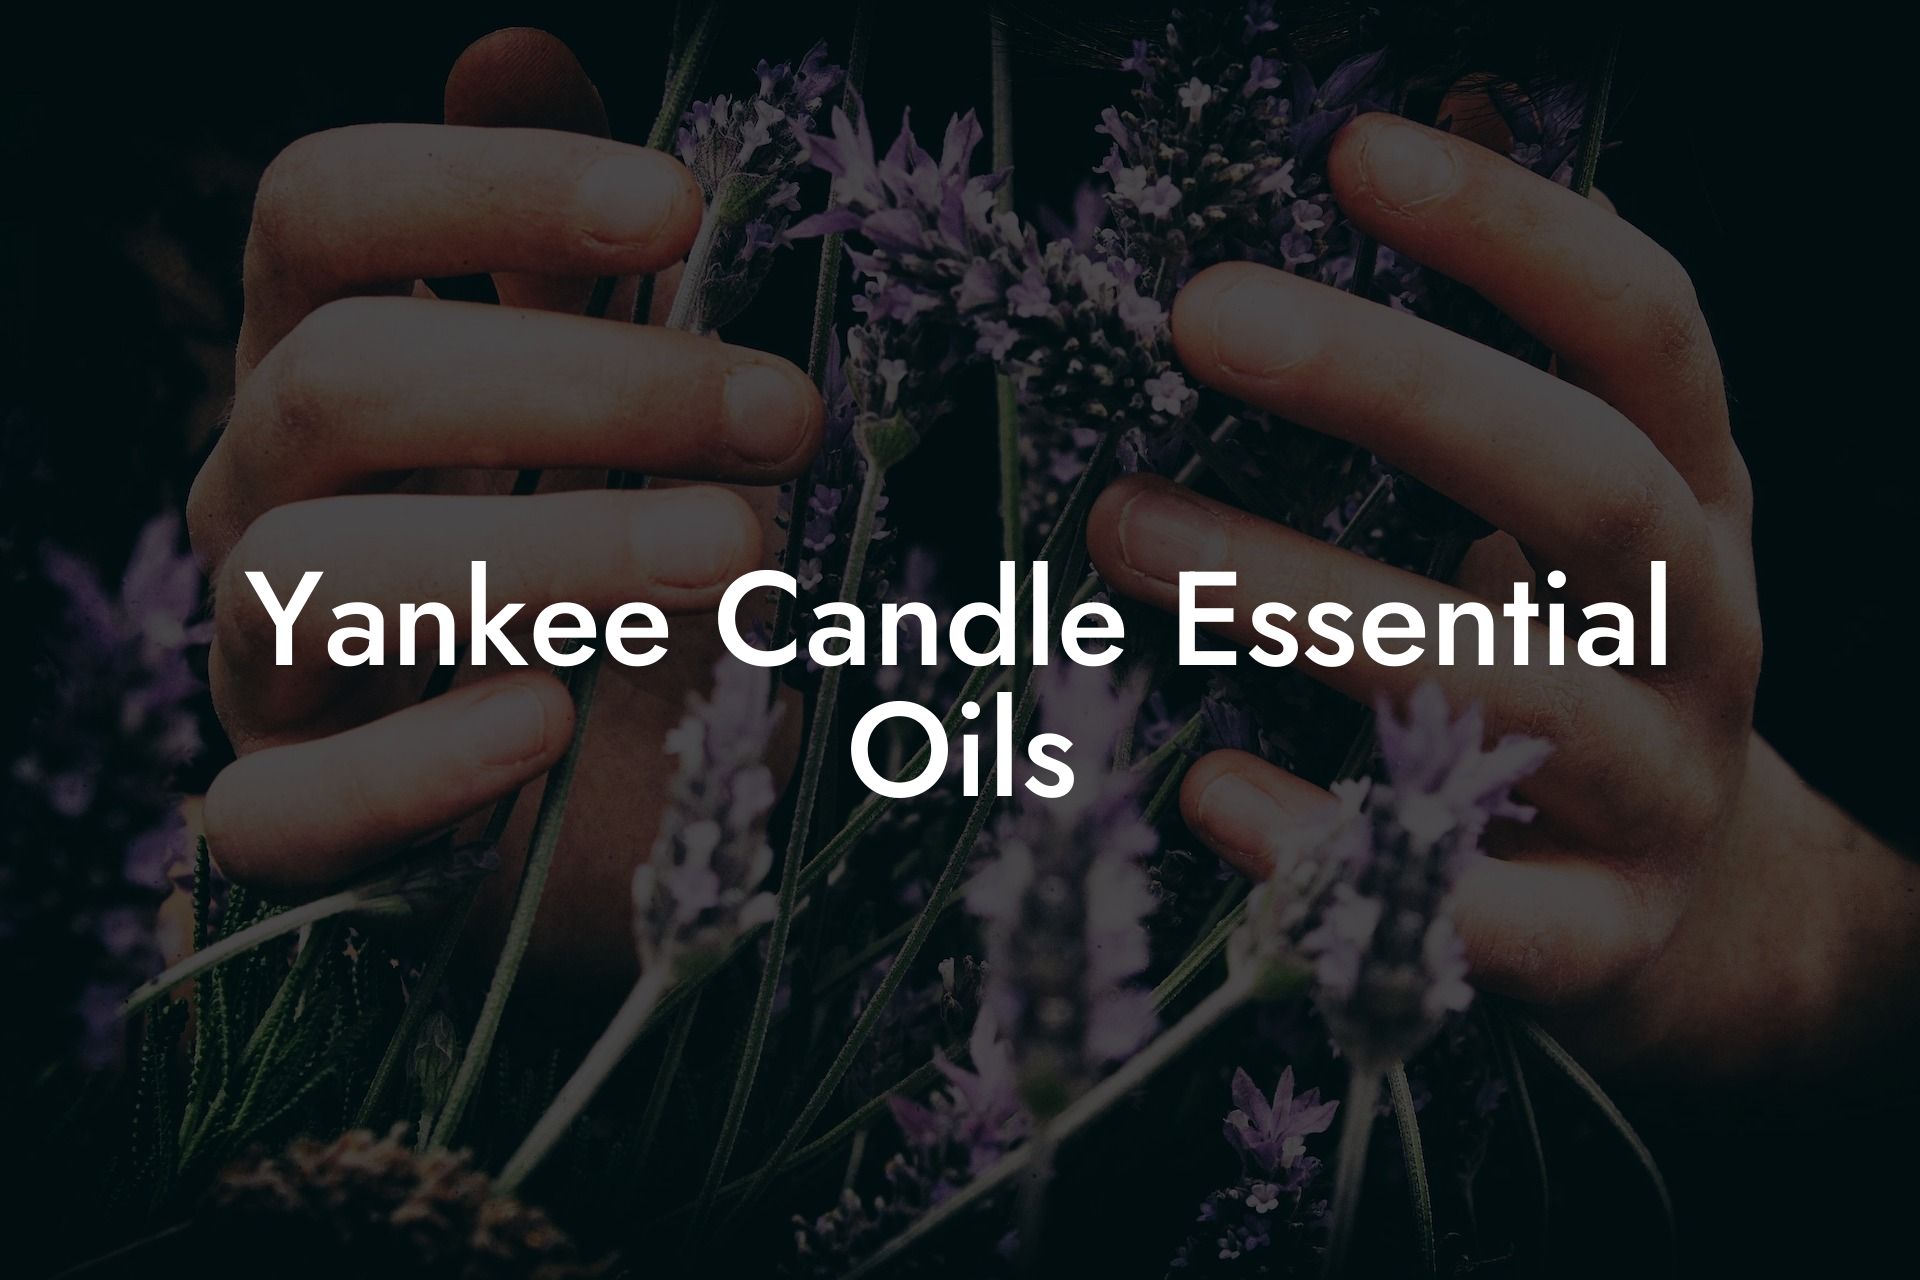 Yankee Candle Essential Oils